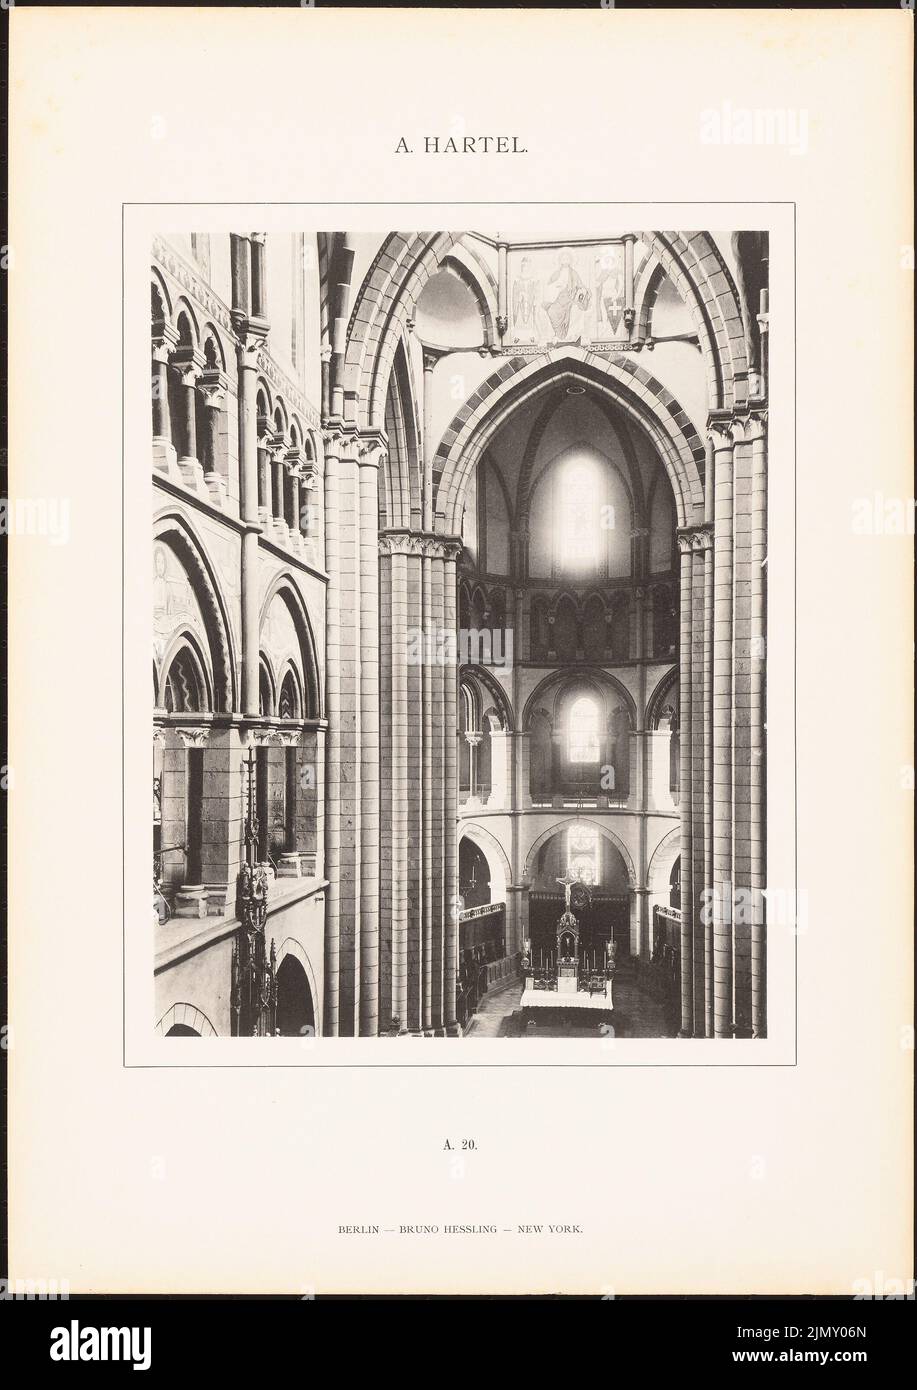 Hartel August (1844-1890), Limburg Cathedral. (From: architecture. Details and ornaments of church architecture in the styles of the Middle Ages, 1st series, Berlin 1896.) (1896-1896): Interior view. Light pressure on paper, 48.6 x 34.3 cm (including scan edges) Stock Photo